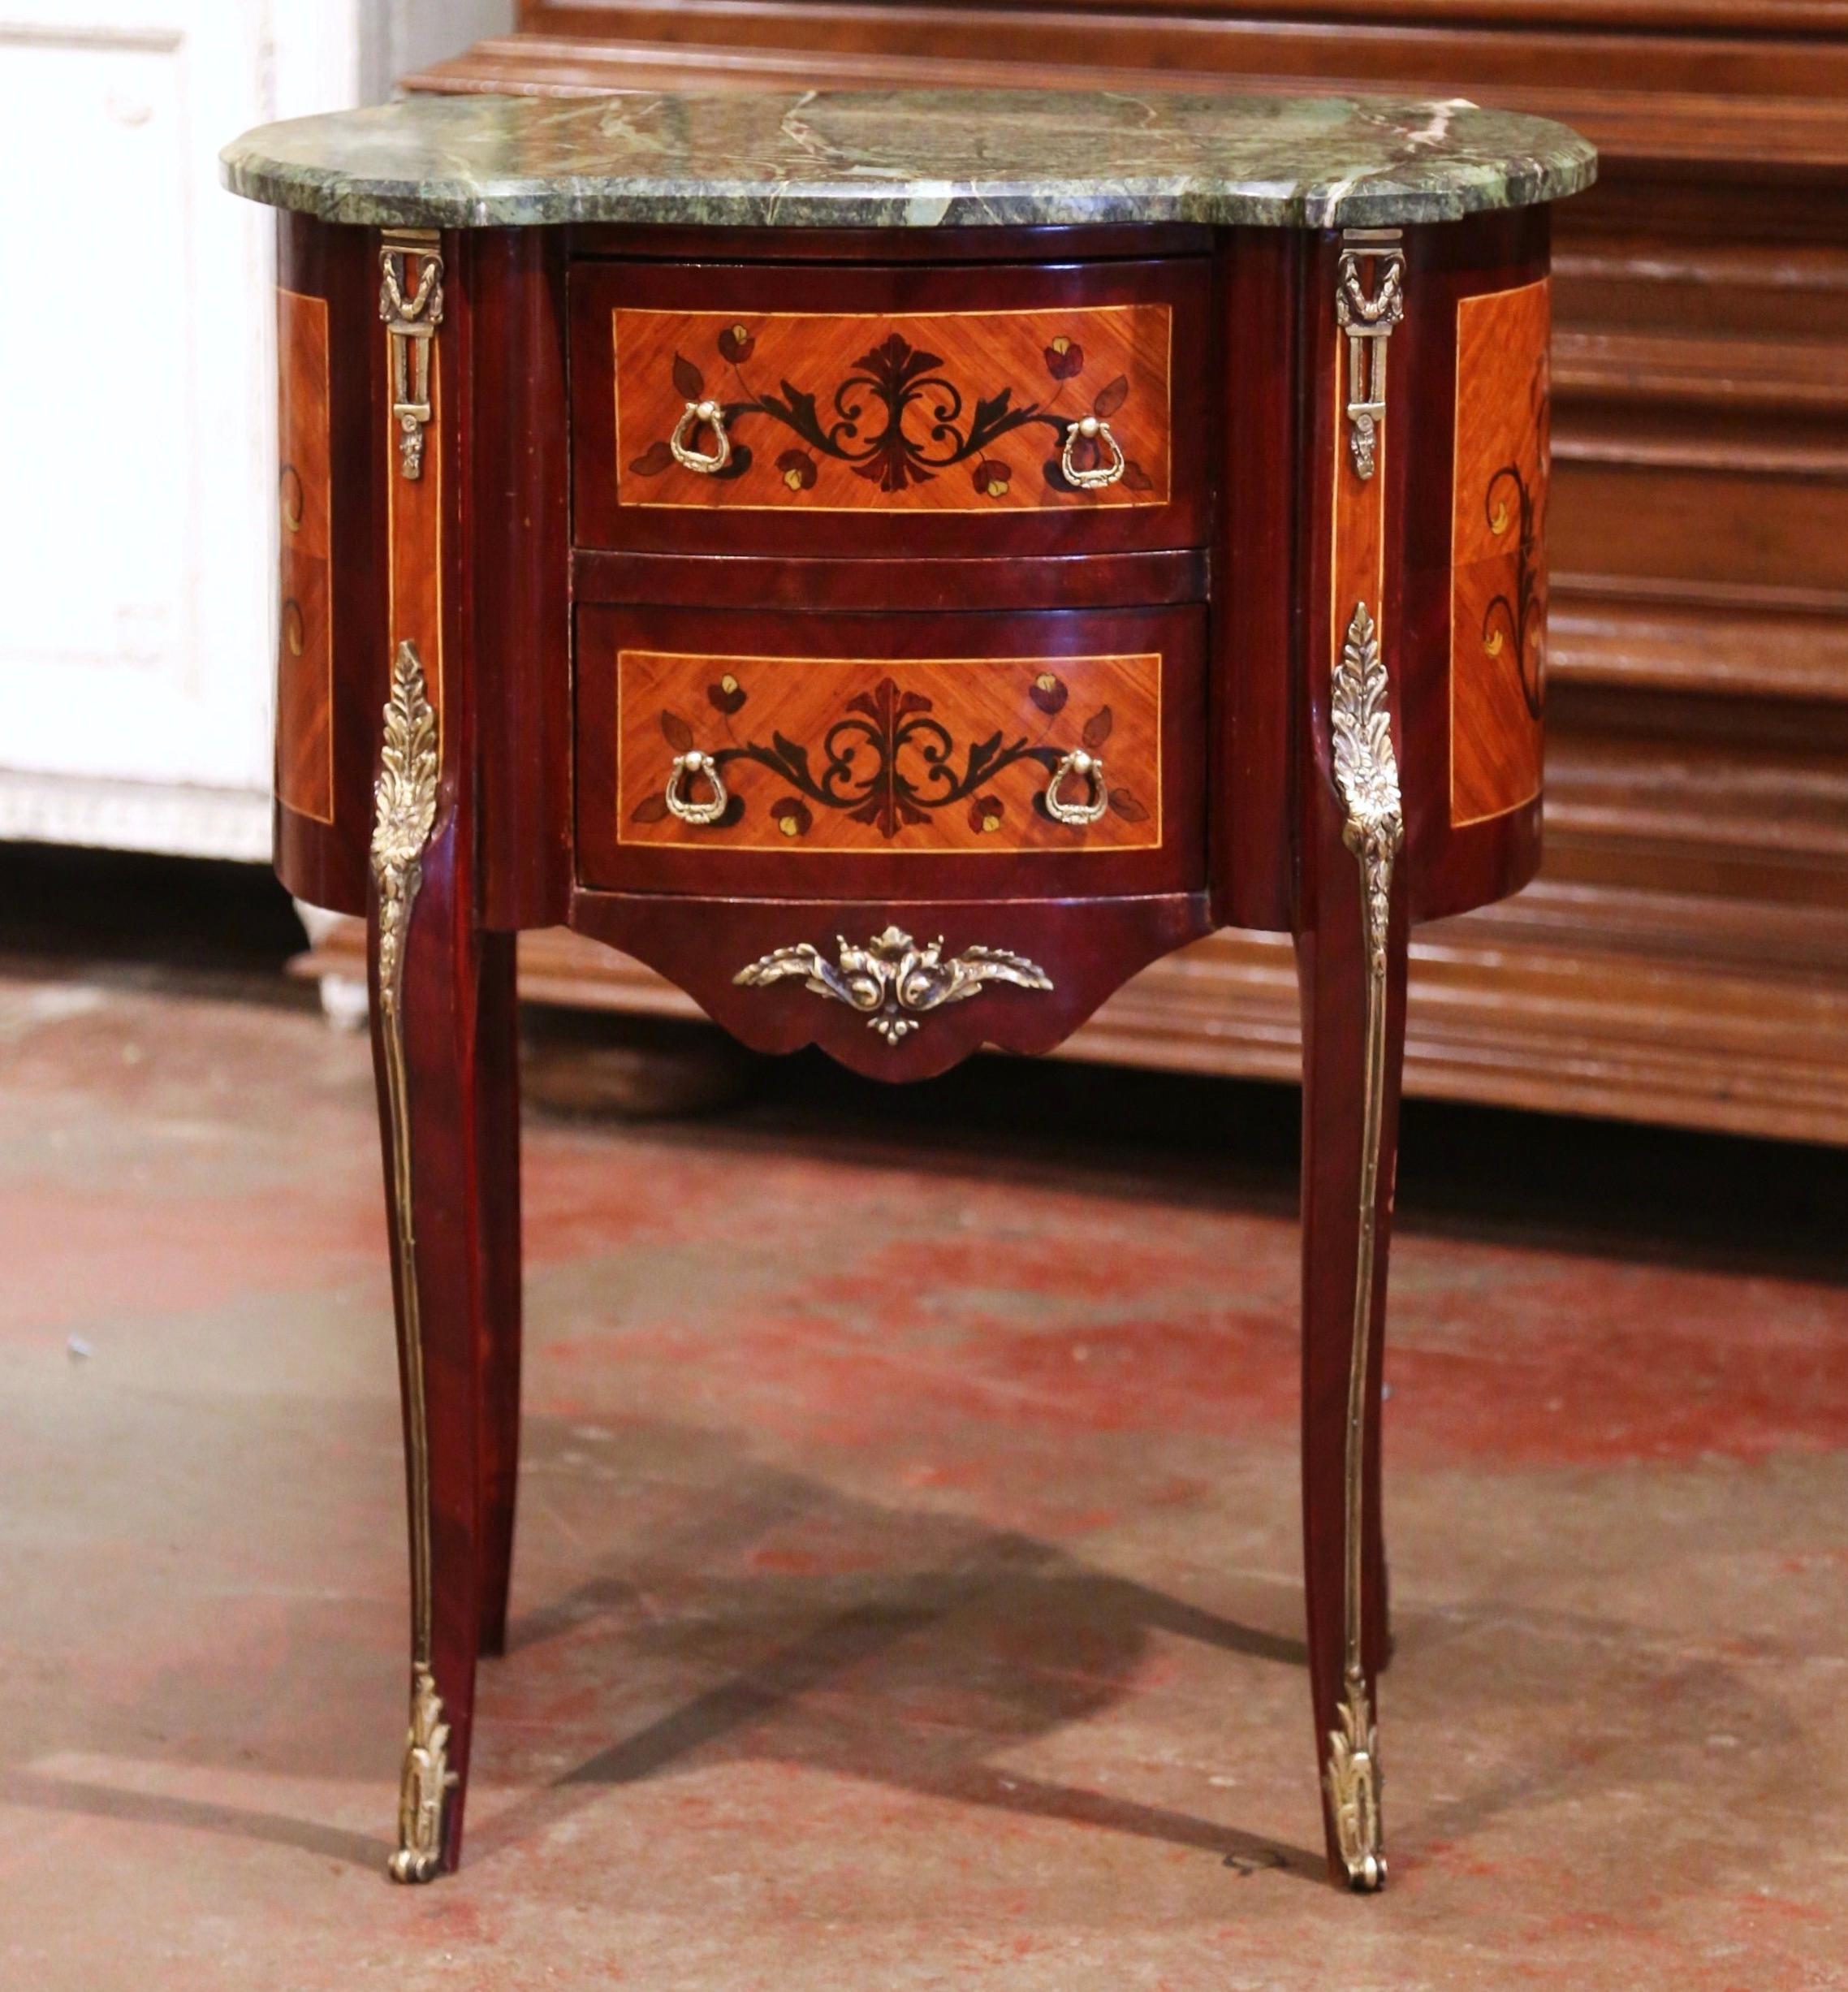 This elegant, kidney-shaped fruitwood antique commode was crafted in France, circa 1980.The commode sits on cabriole legs ending with brass sabots over a scalloped apron embellished with a center decorative brass mount. The front features two